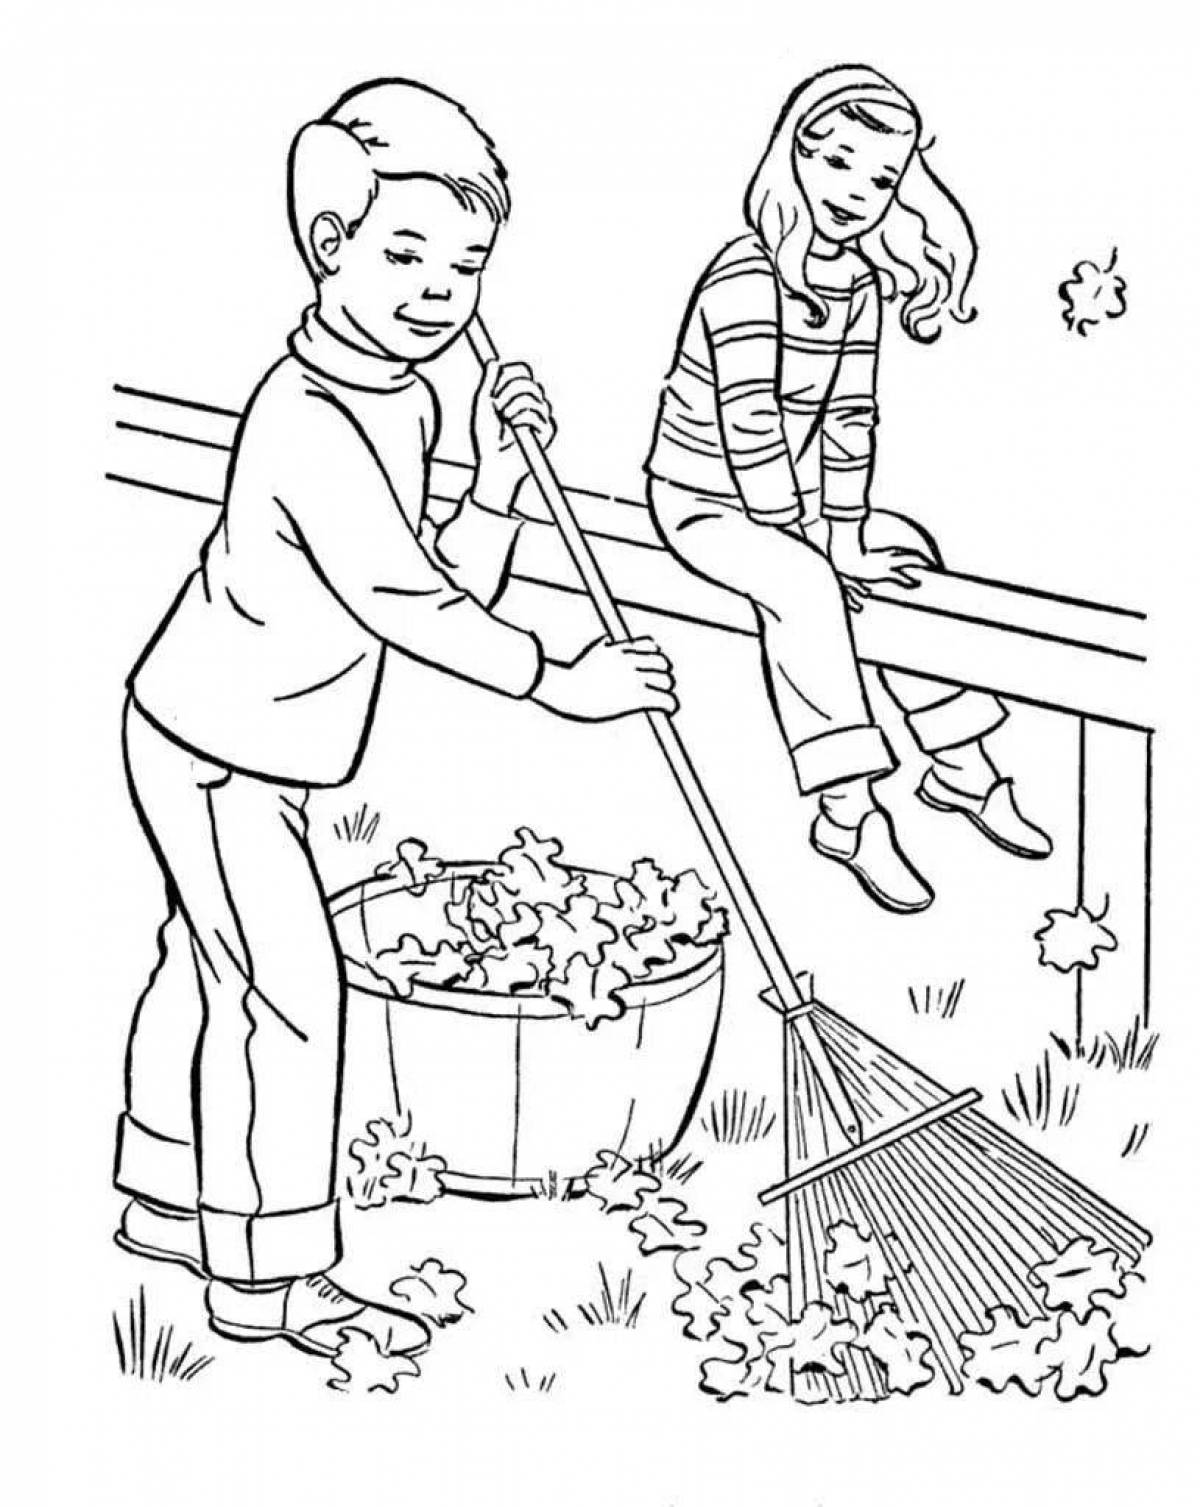 Creative Good Deeds Coloring Page